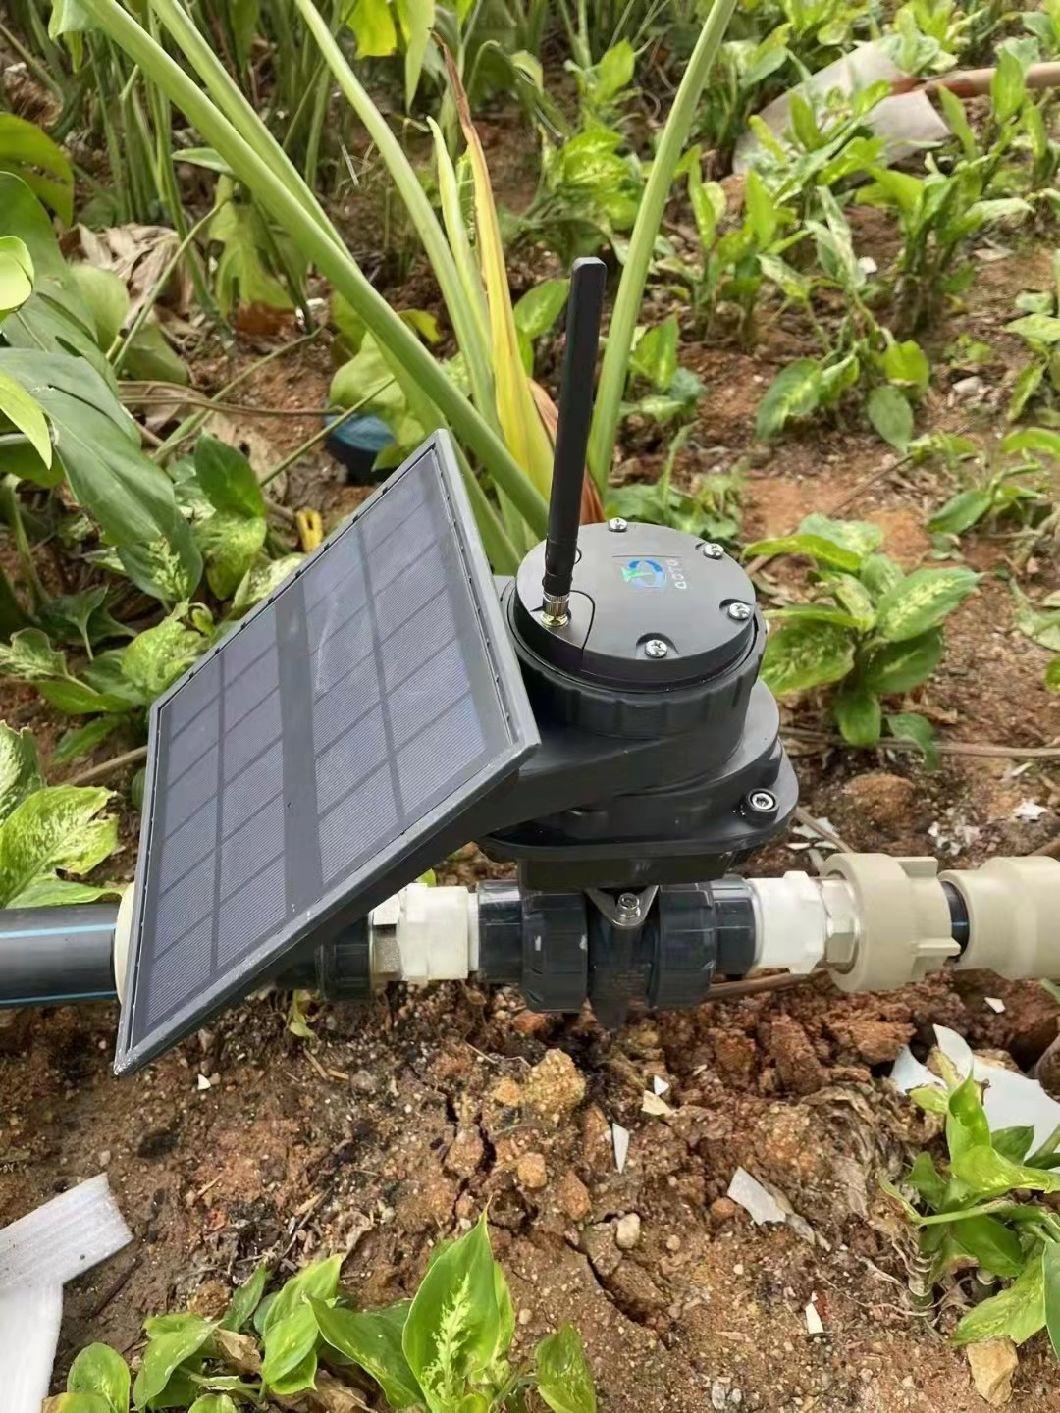 Mobile Phone Controlled Electric Water Valve for Drip Irrigation